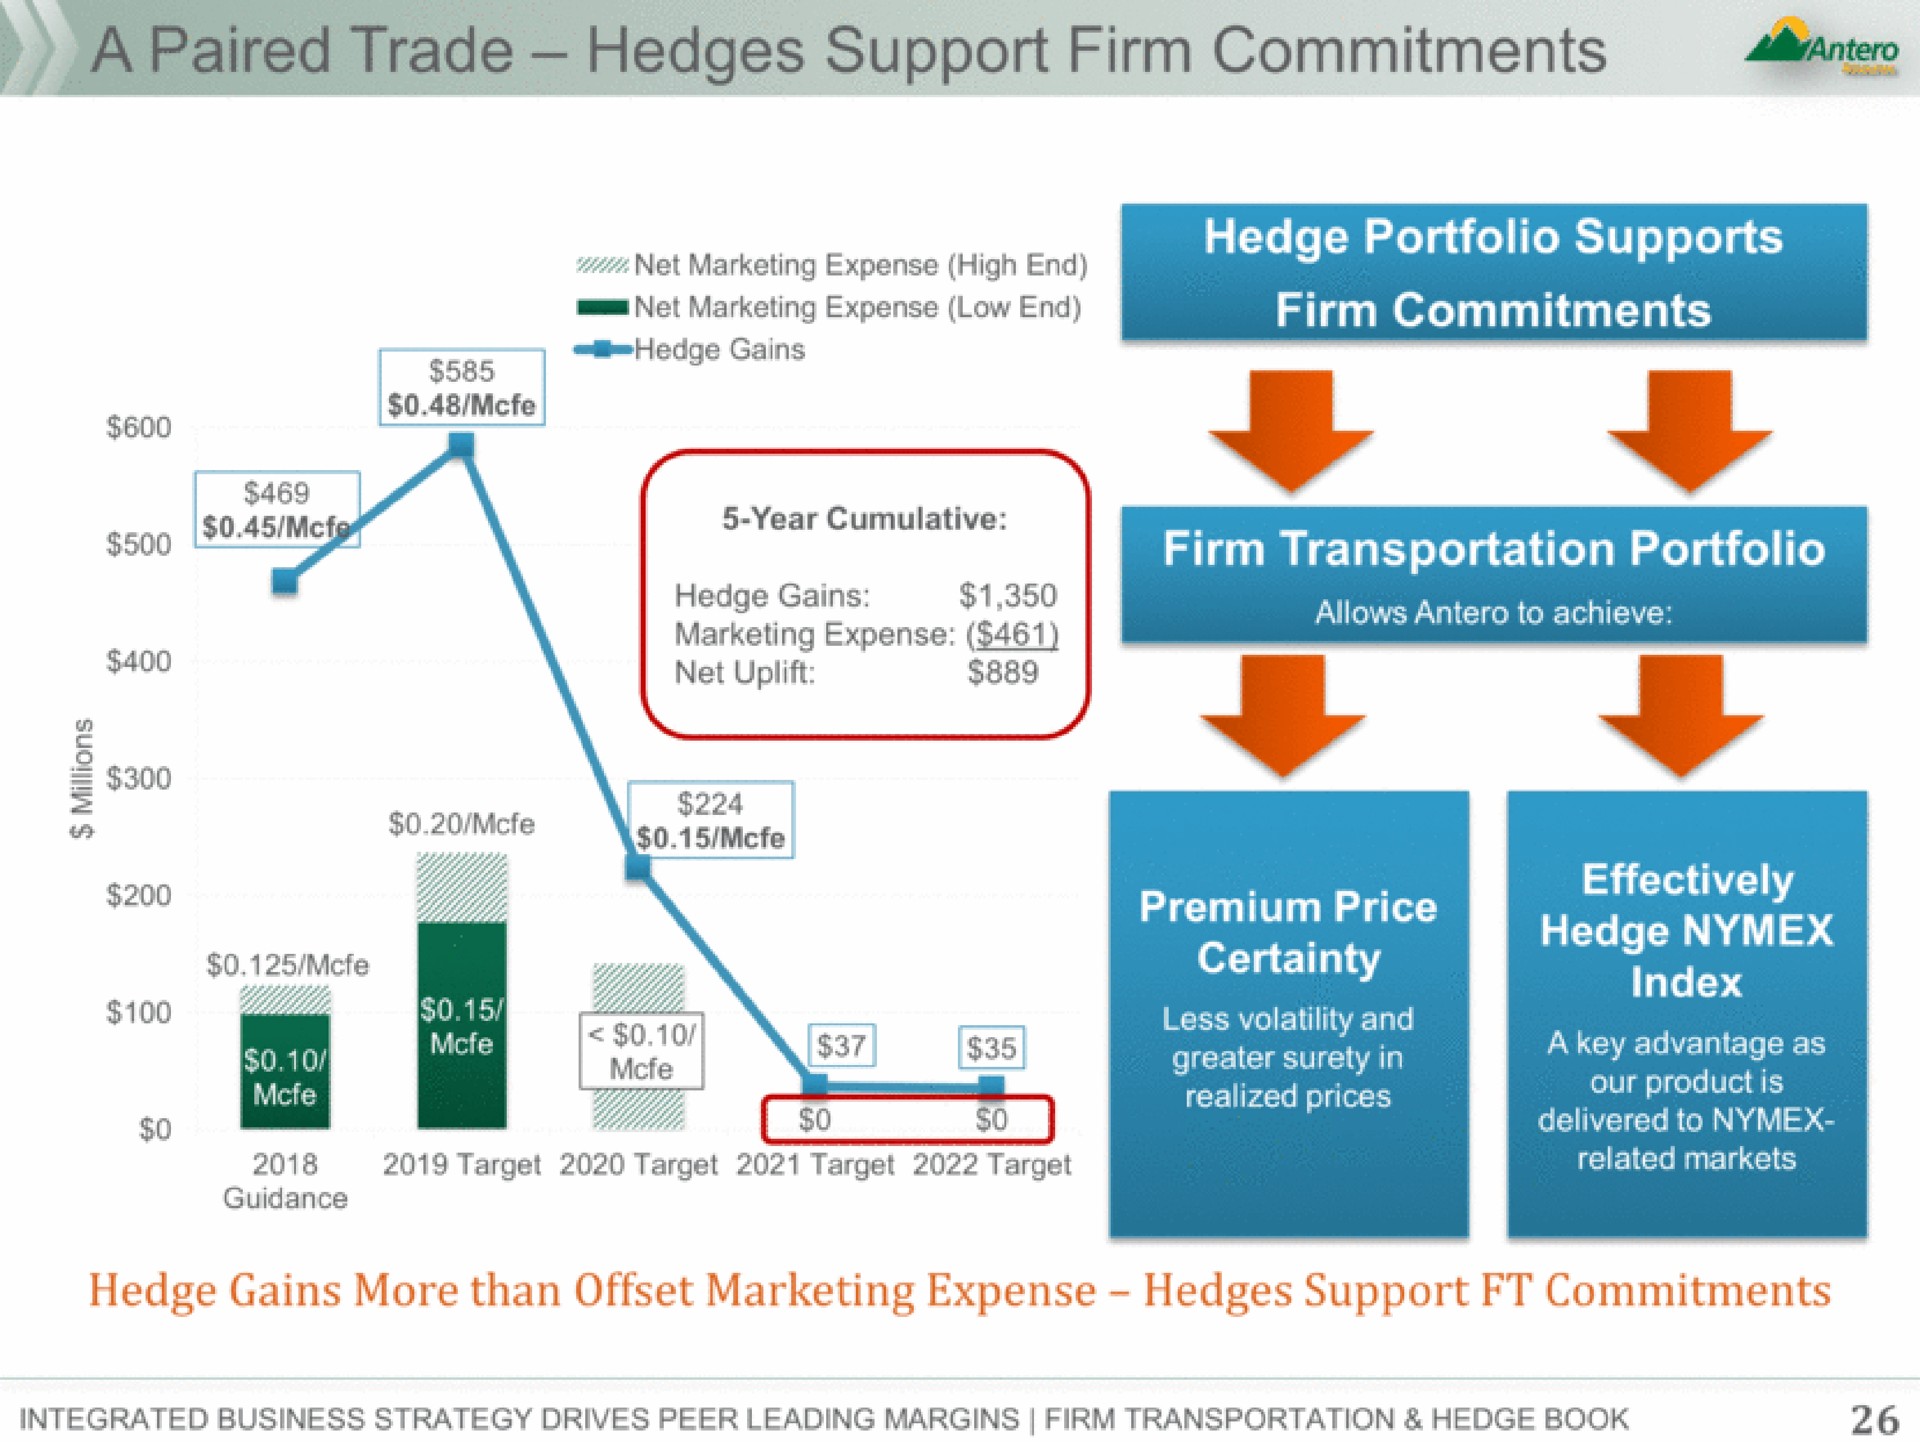 hedges support firm commitments | Antero Midstream Partners